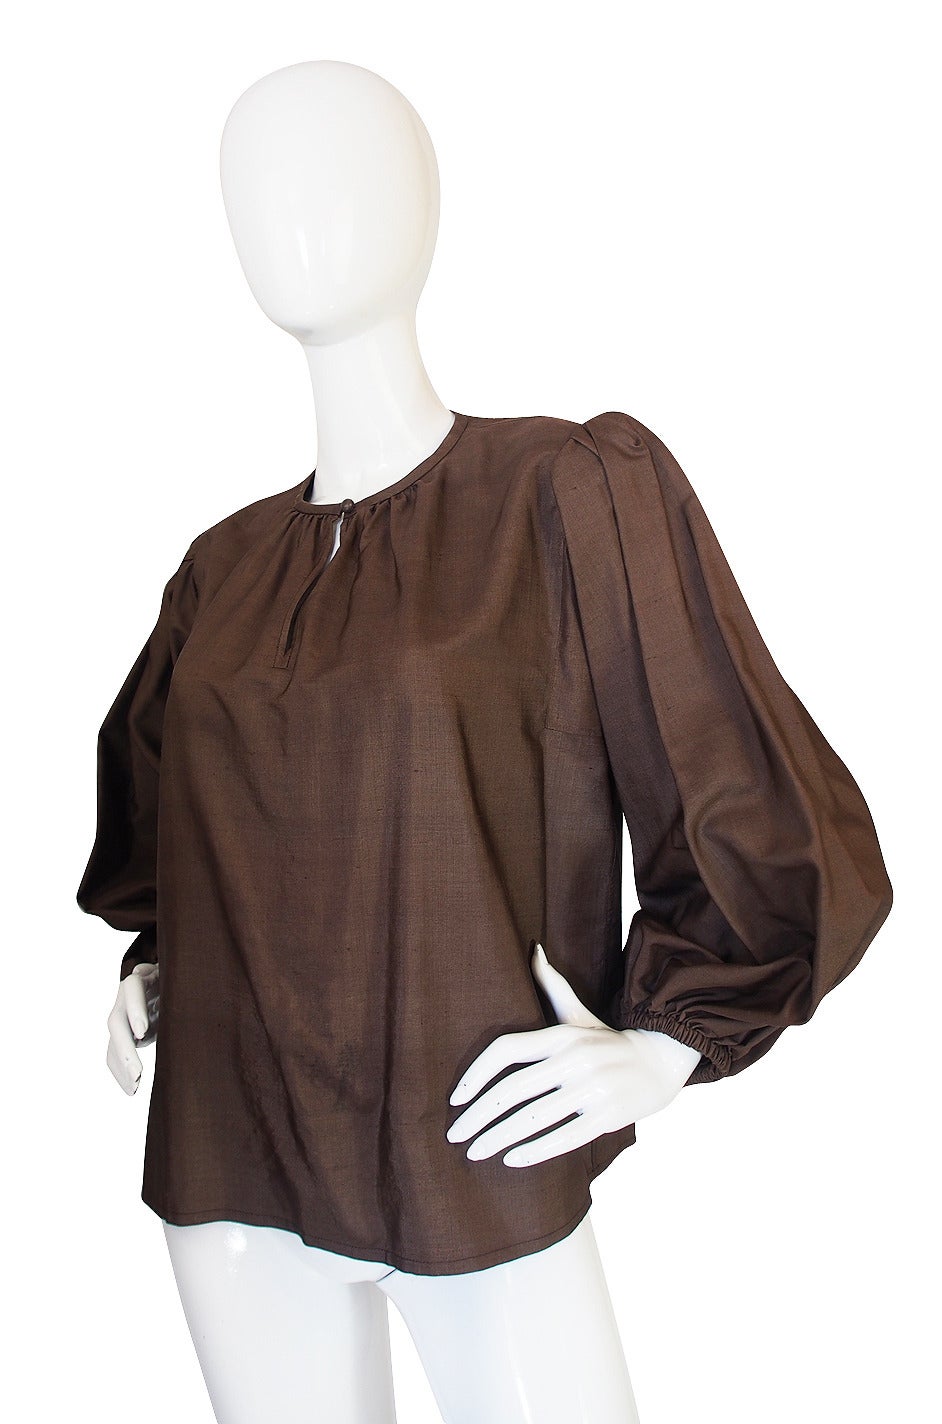 This stunning, loose fitting pheasant style top is fabricated from a fabulous polished raw silk in a milk chocolate that is very flattering on almost any skin tone. The loose and easy cut are a signature Yves nod to sexiness and this particular